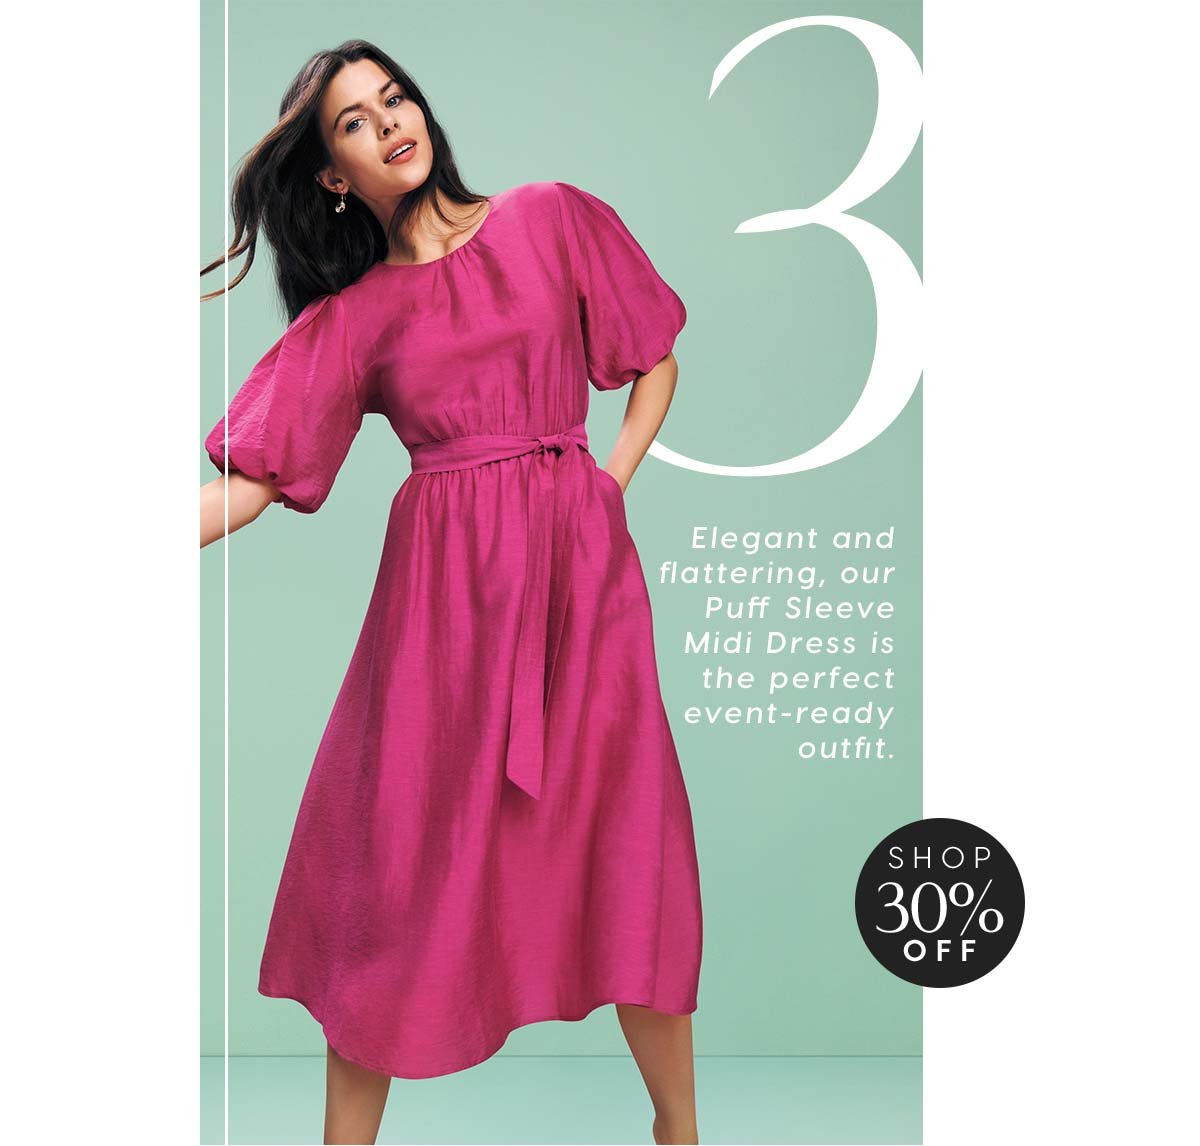 3. Elegant and flattering, our Puff Sleeve Midi Dress is the perfect event-ready outfit. 